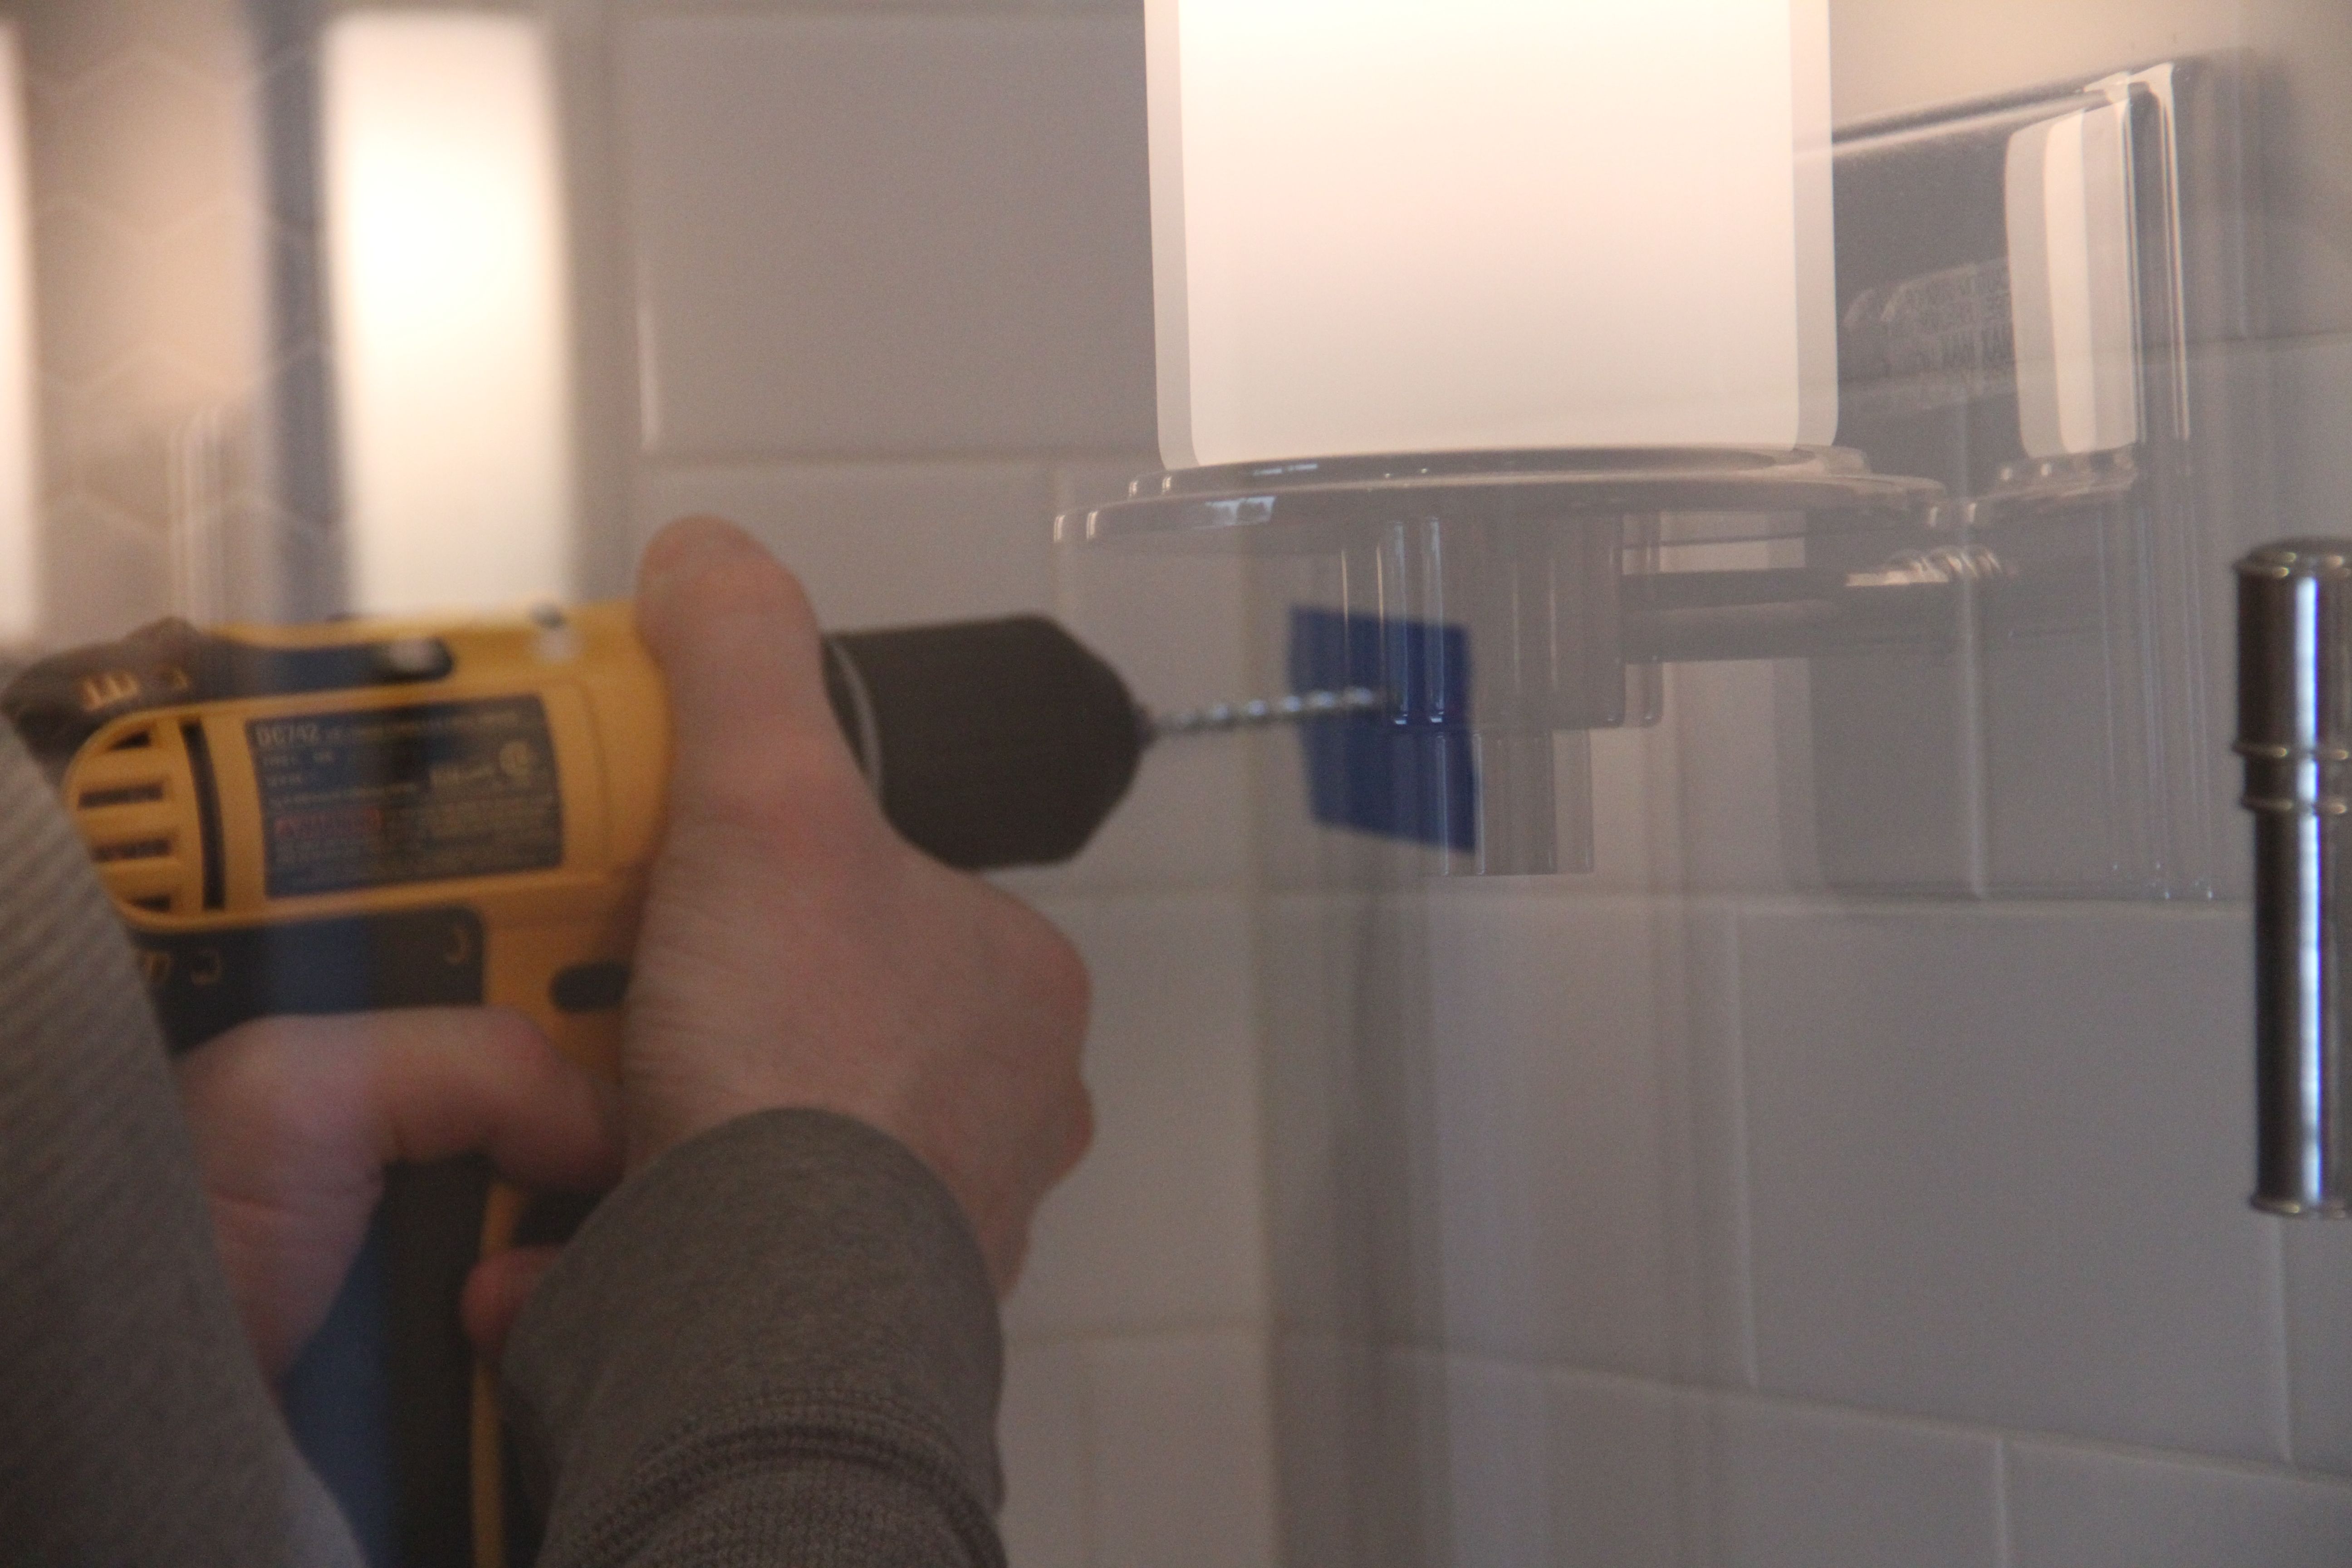 Jeff took the plunge and drilled into our shower wall. I was nervous, but tried not to let it show.